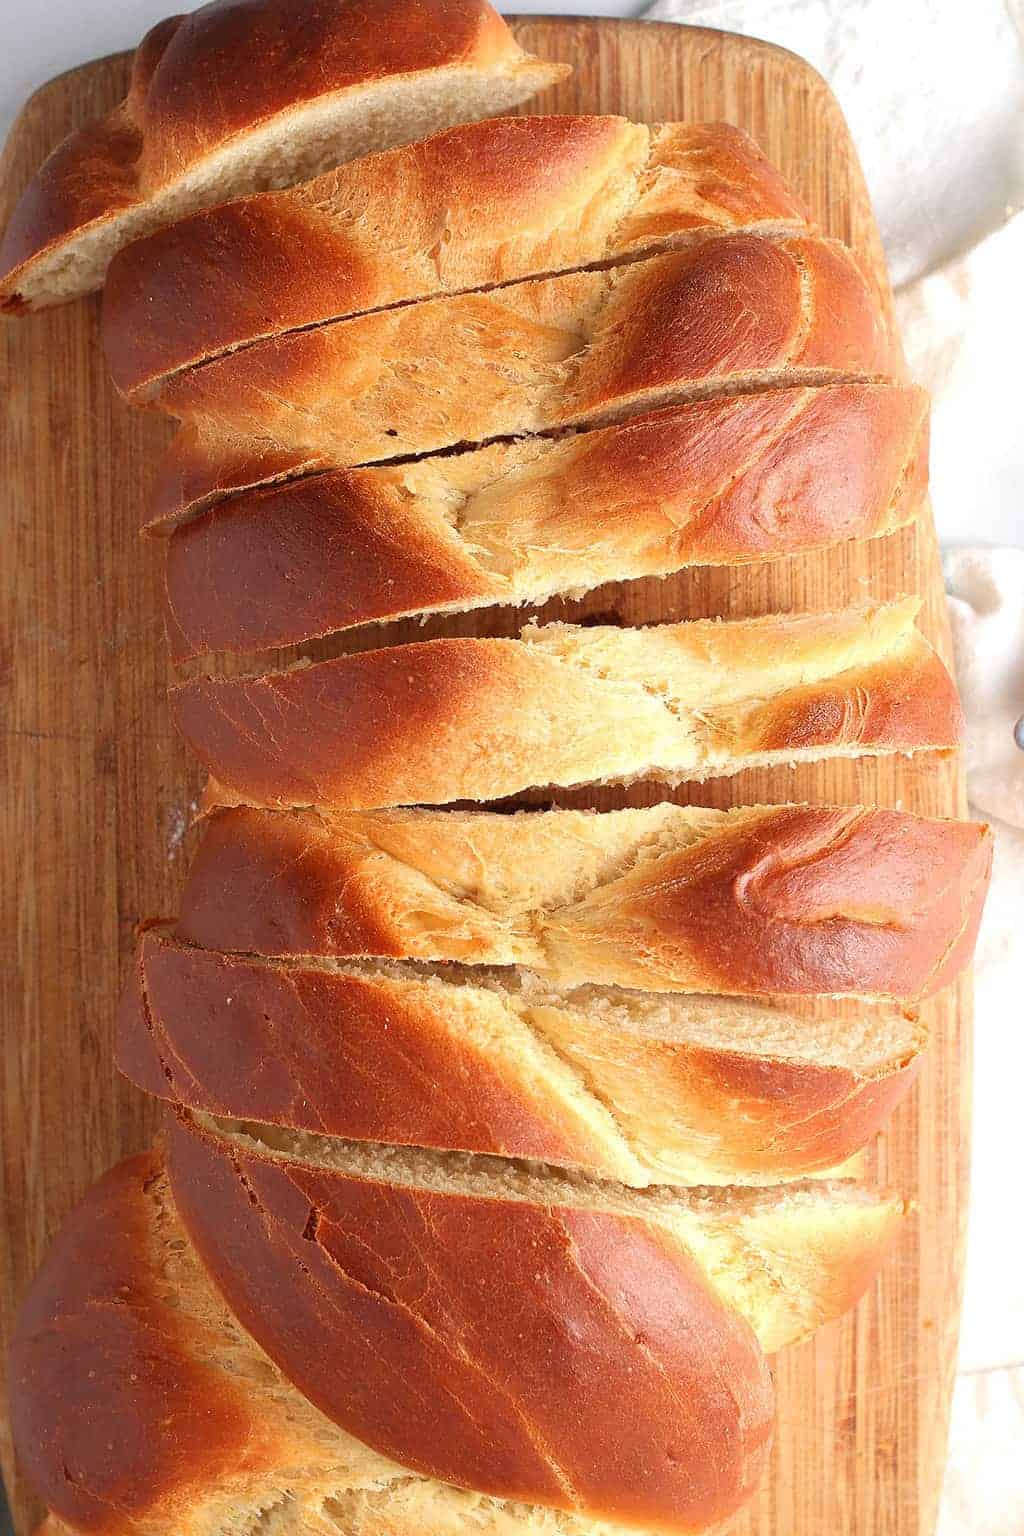 Slices of challah bread on cutting board